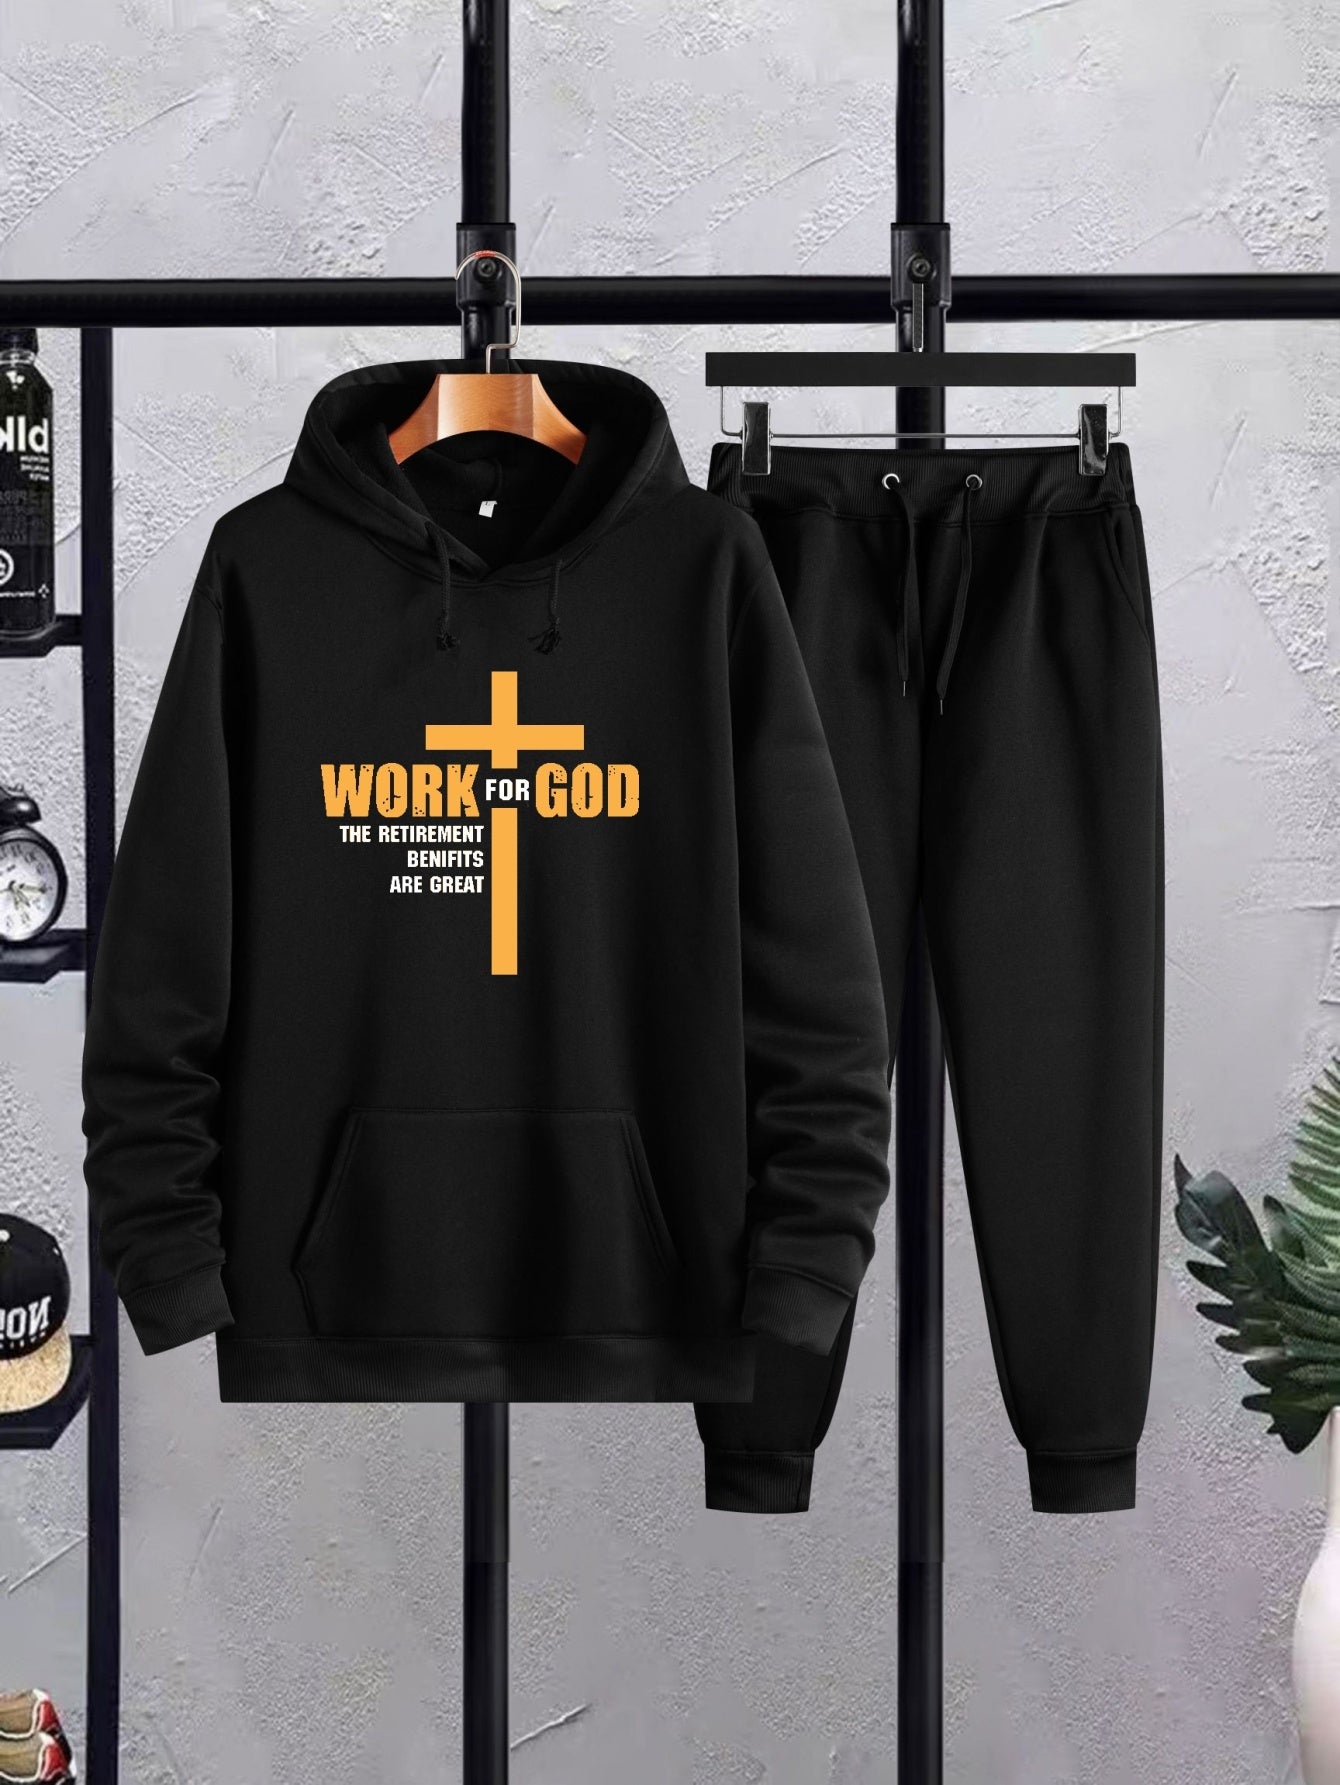 Work For God The Retirement Benefits Are Great Men's Christian Casual Outfit claimedbygoddesigns